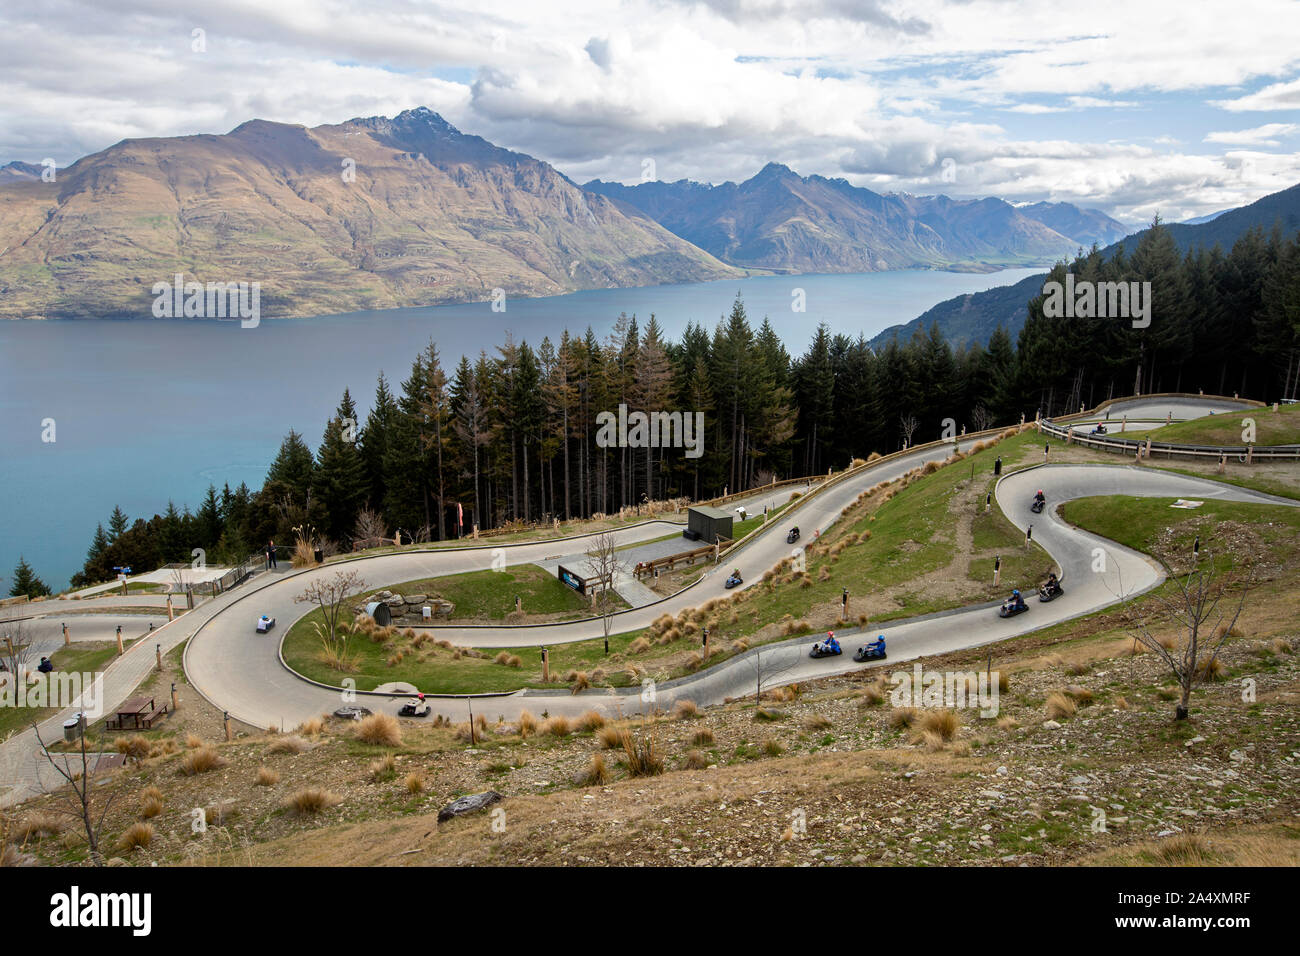 The luge at the top of the gondola, Queenstown, New Zealand Stock Photo